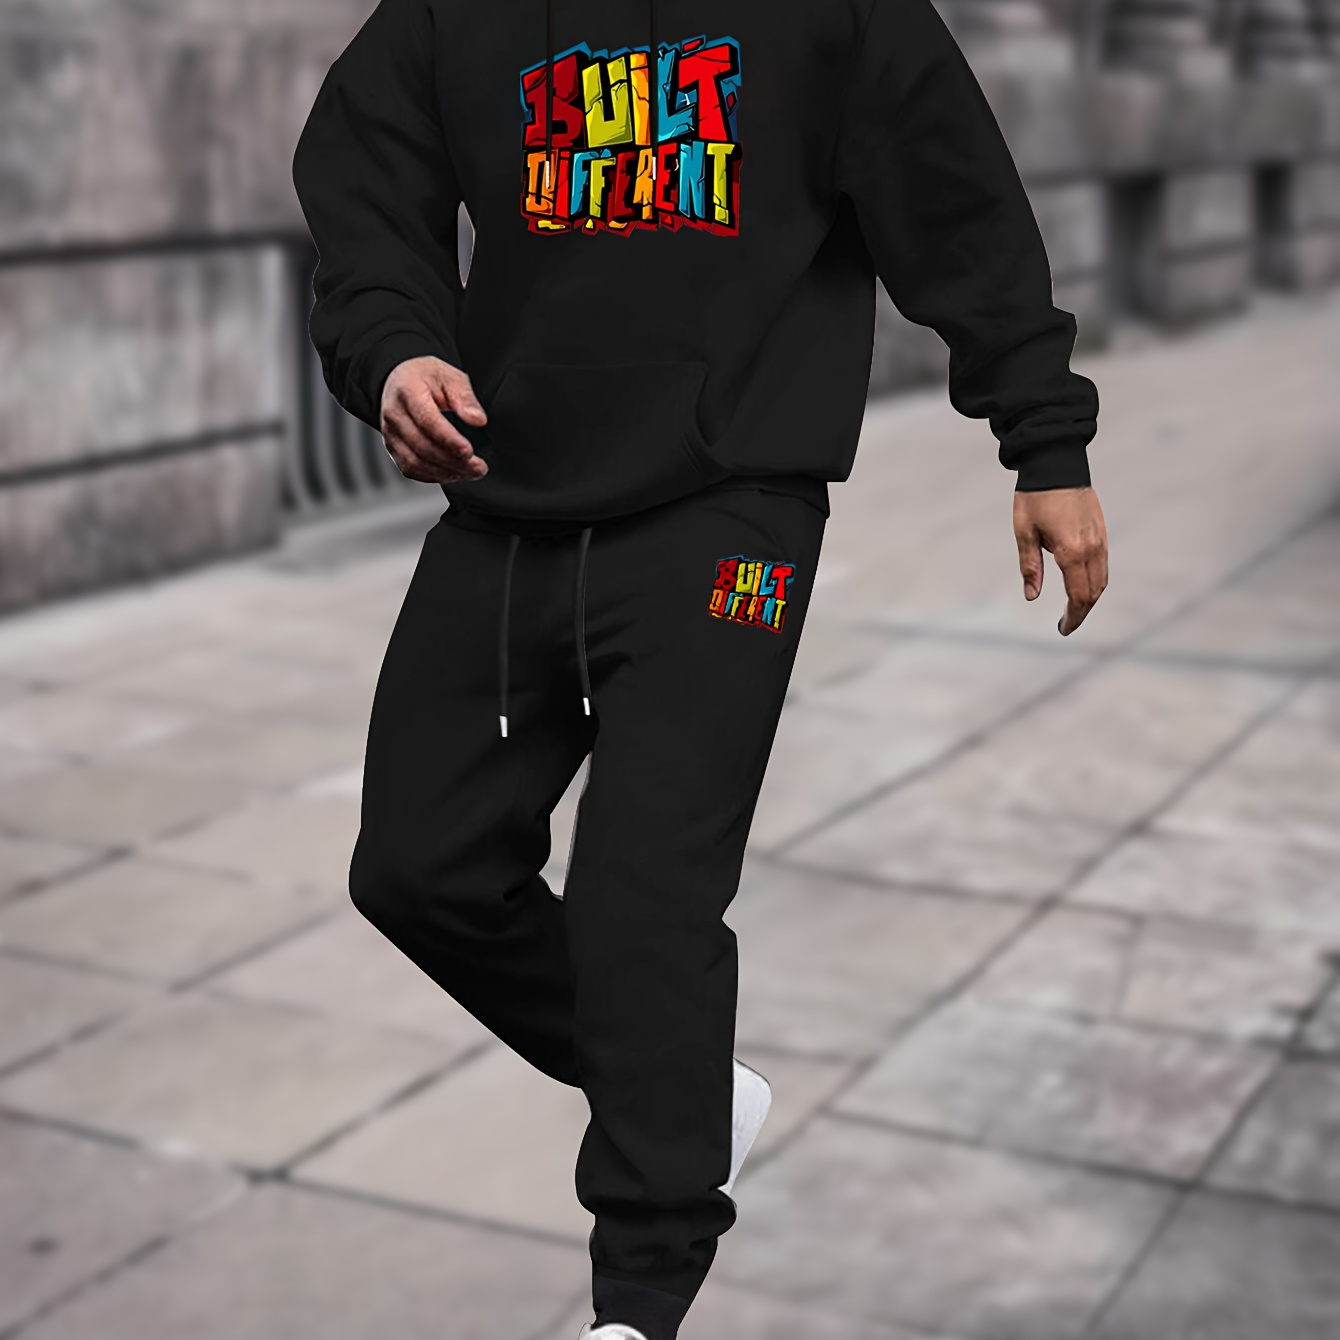 

Colorful Graffiti Built Different Print, Men's 2pcs Outfits, Casual Long Sleeve Hooded Pullover Sweatshirt And Sweatpants Set For Spring Fall, Men's Clothing